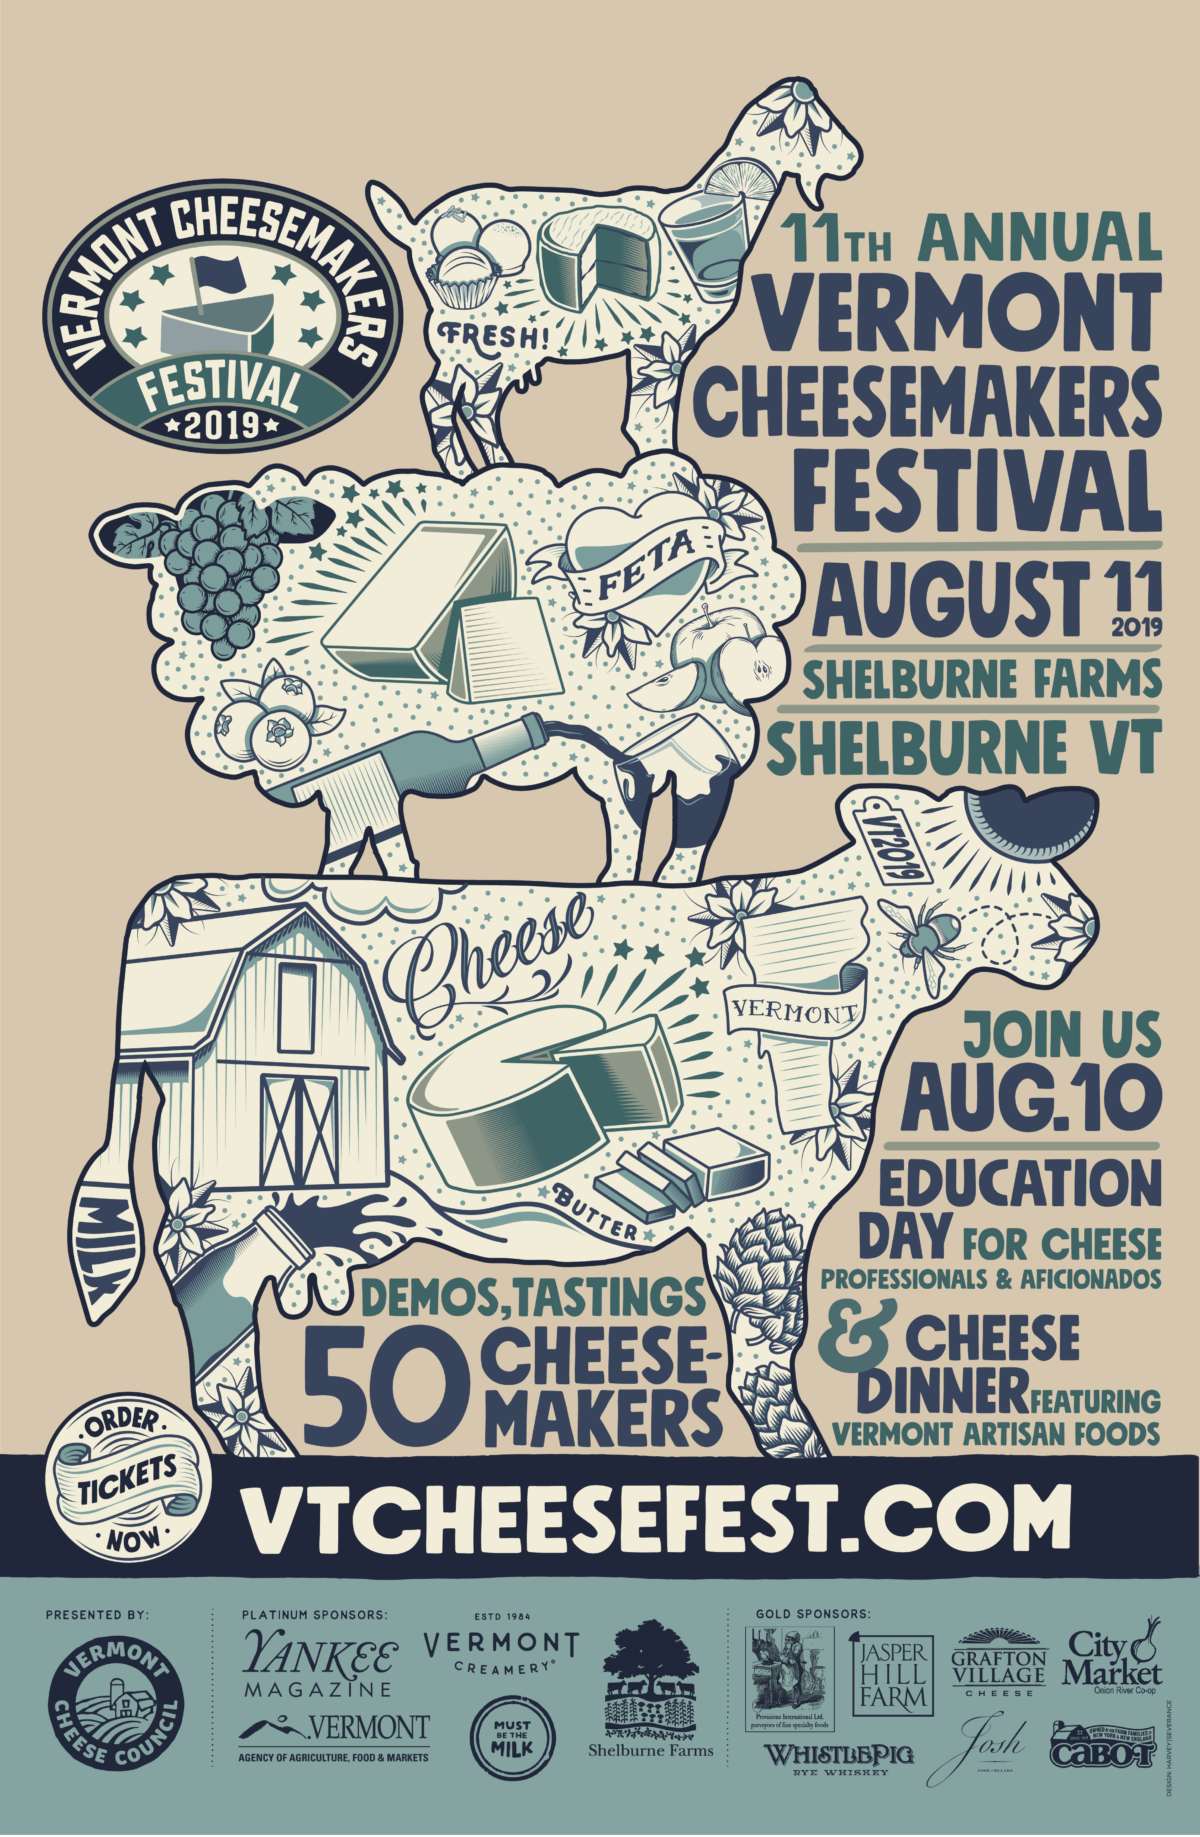 11th Annual Vermont Cheesemakers Festival Vermont Cheese Council